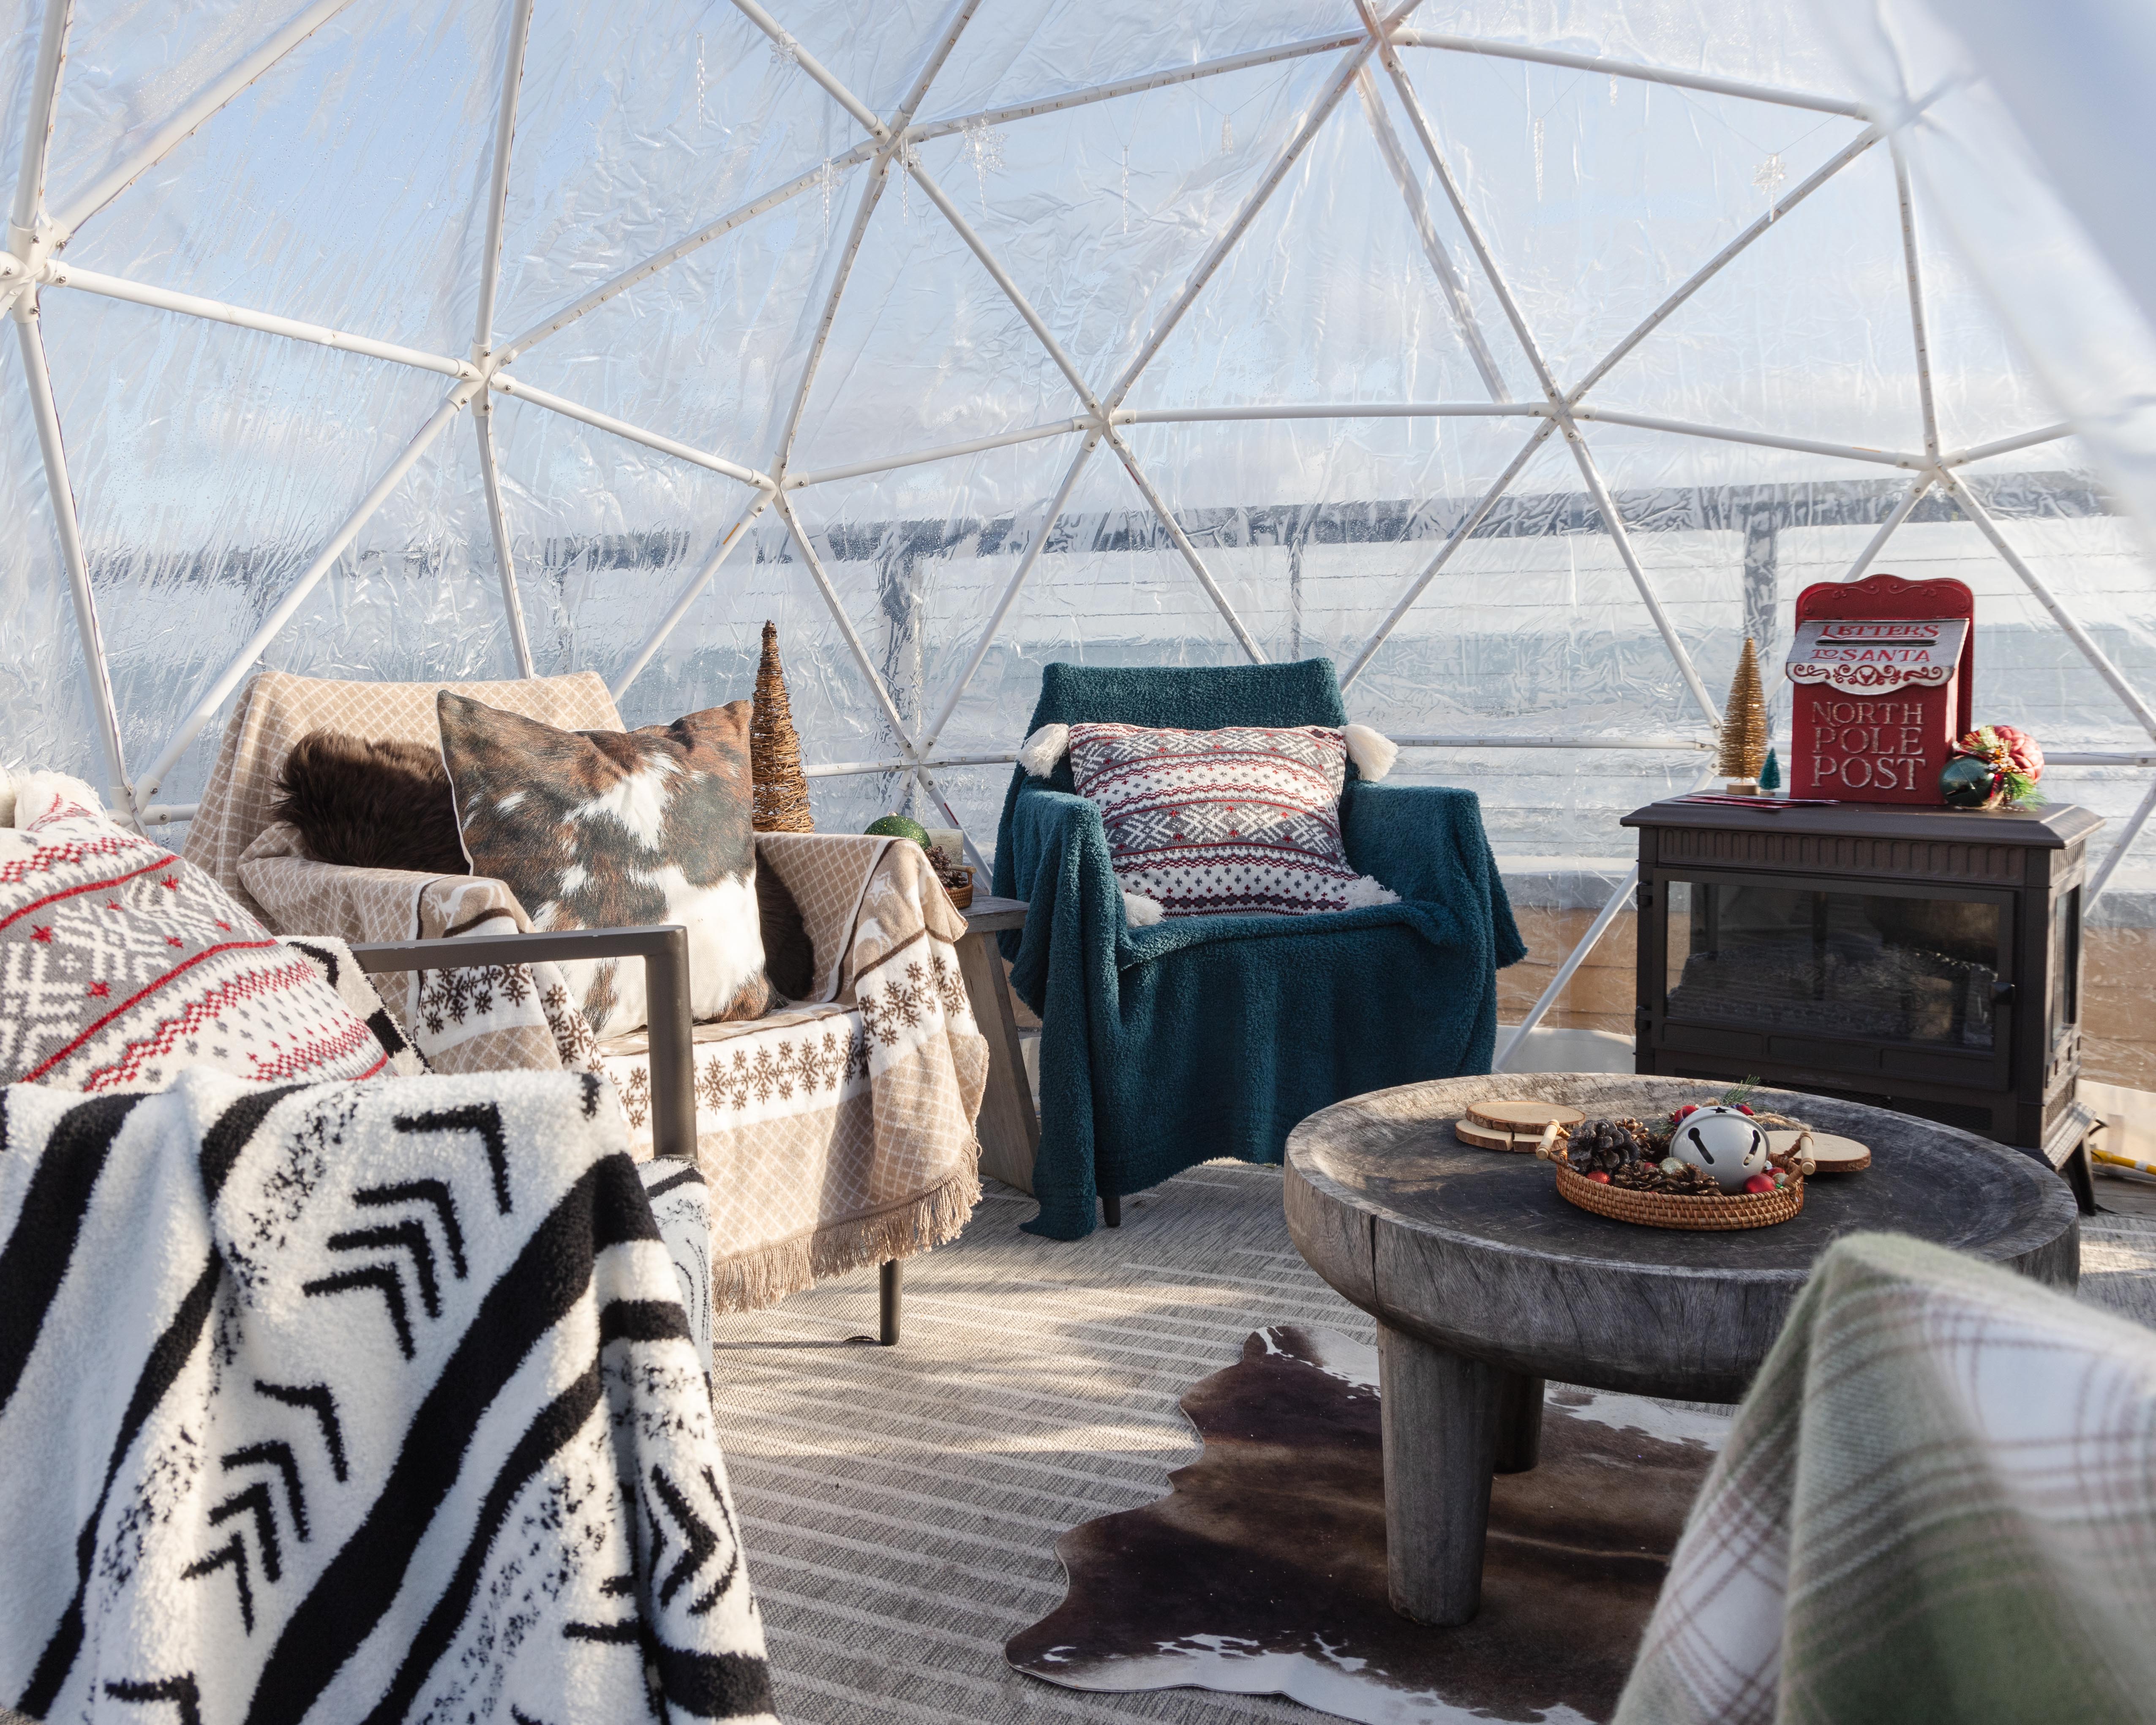 Interior of igloo with chairs, pillows, Barefoot Dreams blankets, table, fire place and holiday decor..